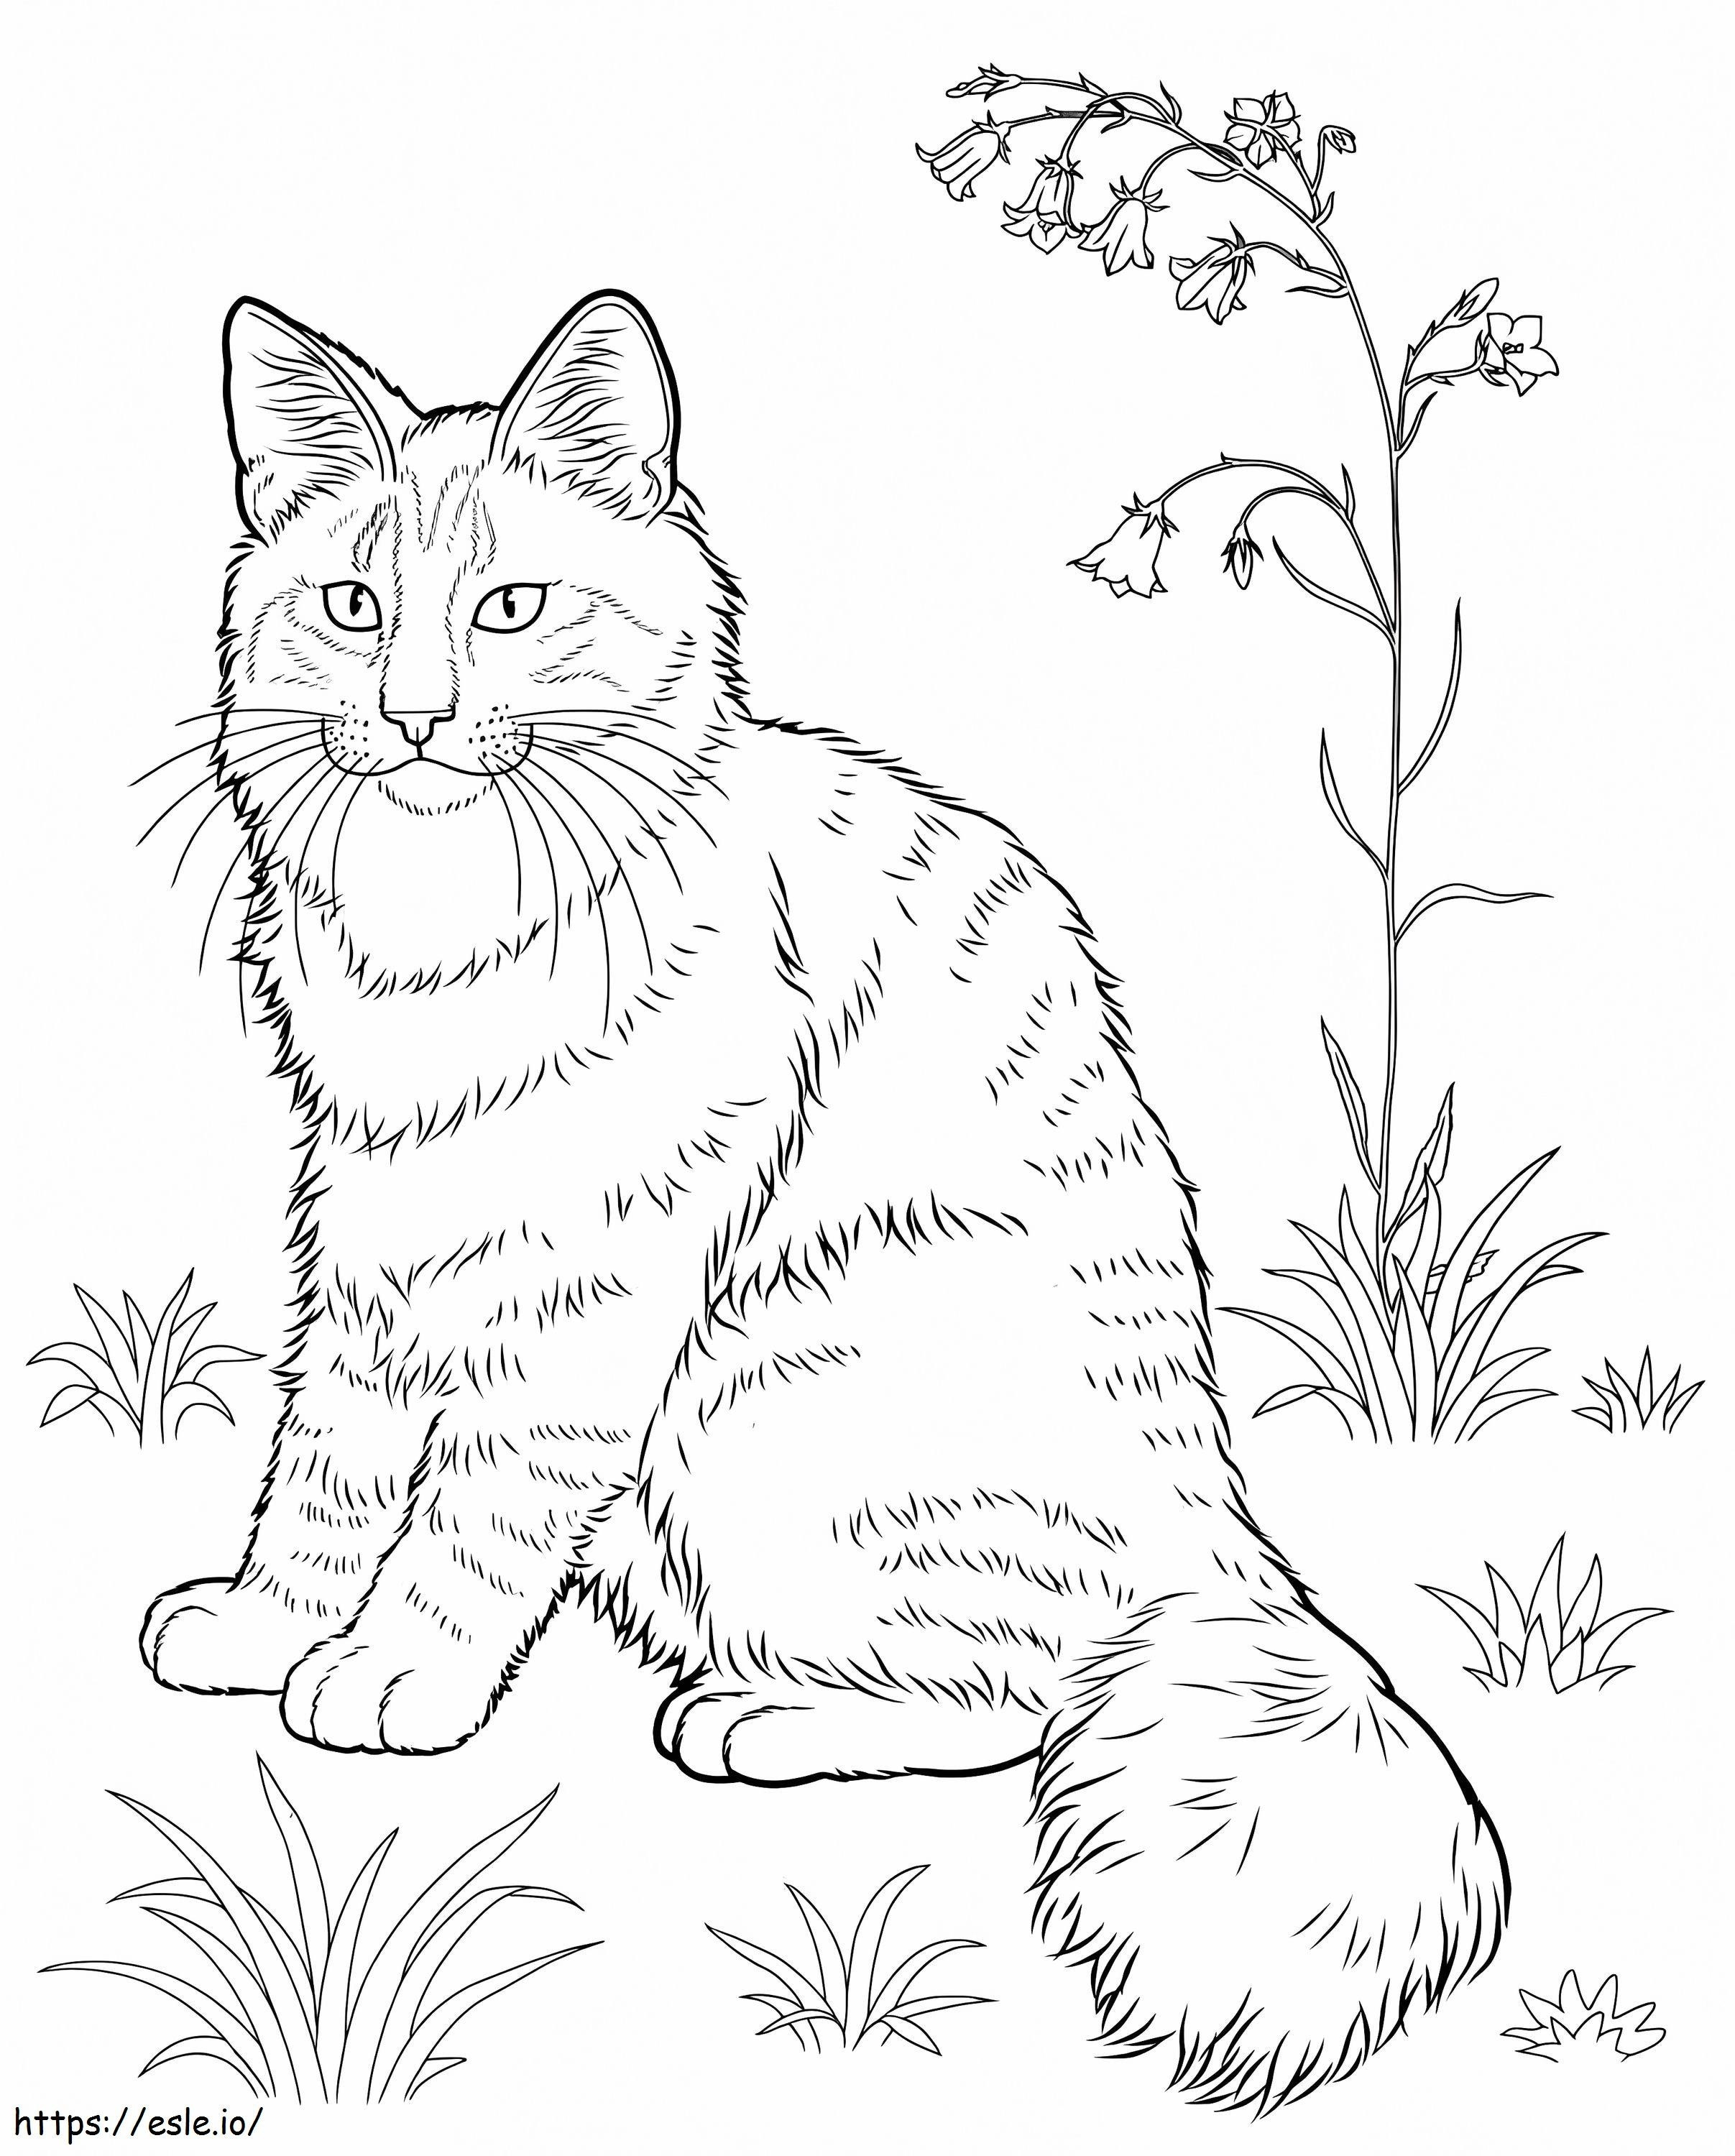 Norwegian Forest Cat 1 coloring page